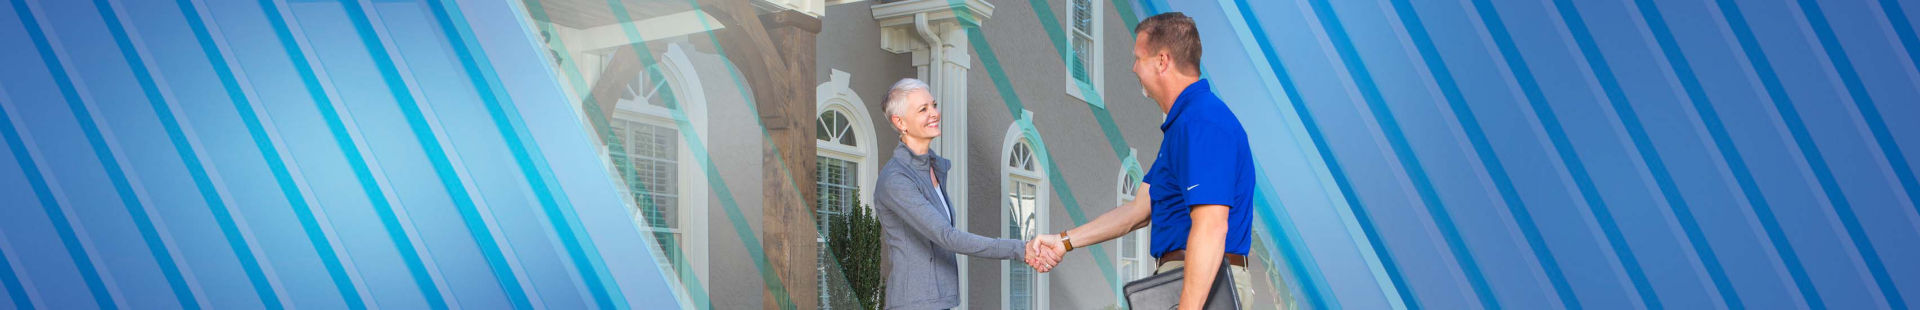 Woman and man shaking hands in front of home